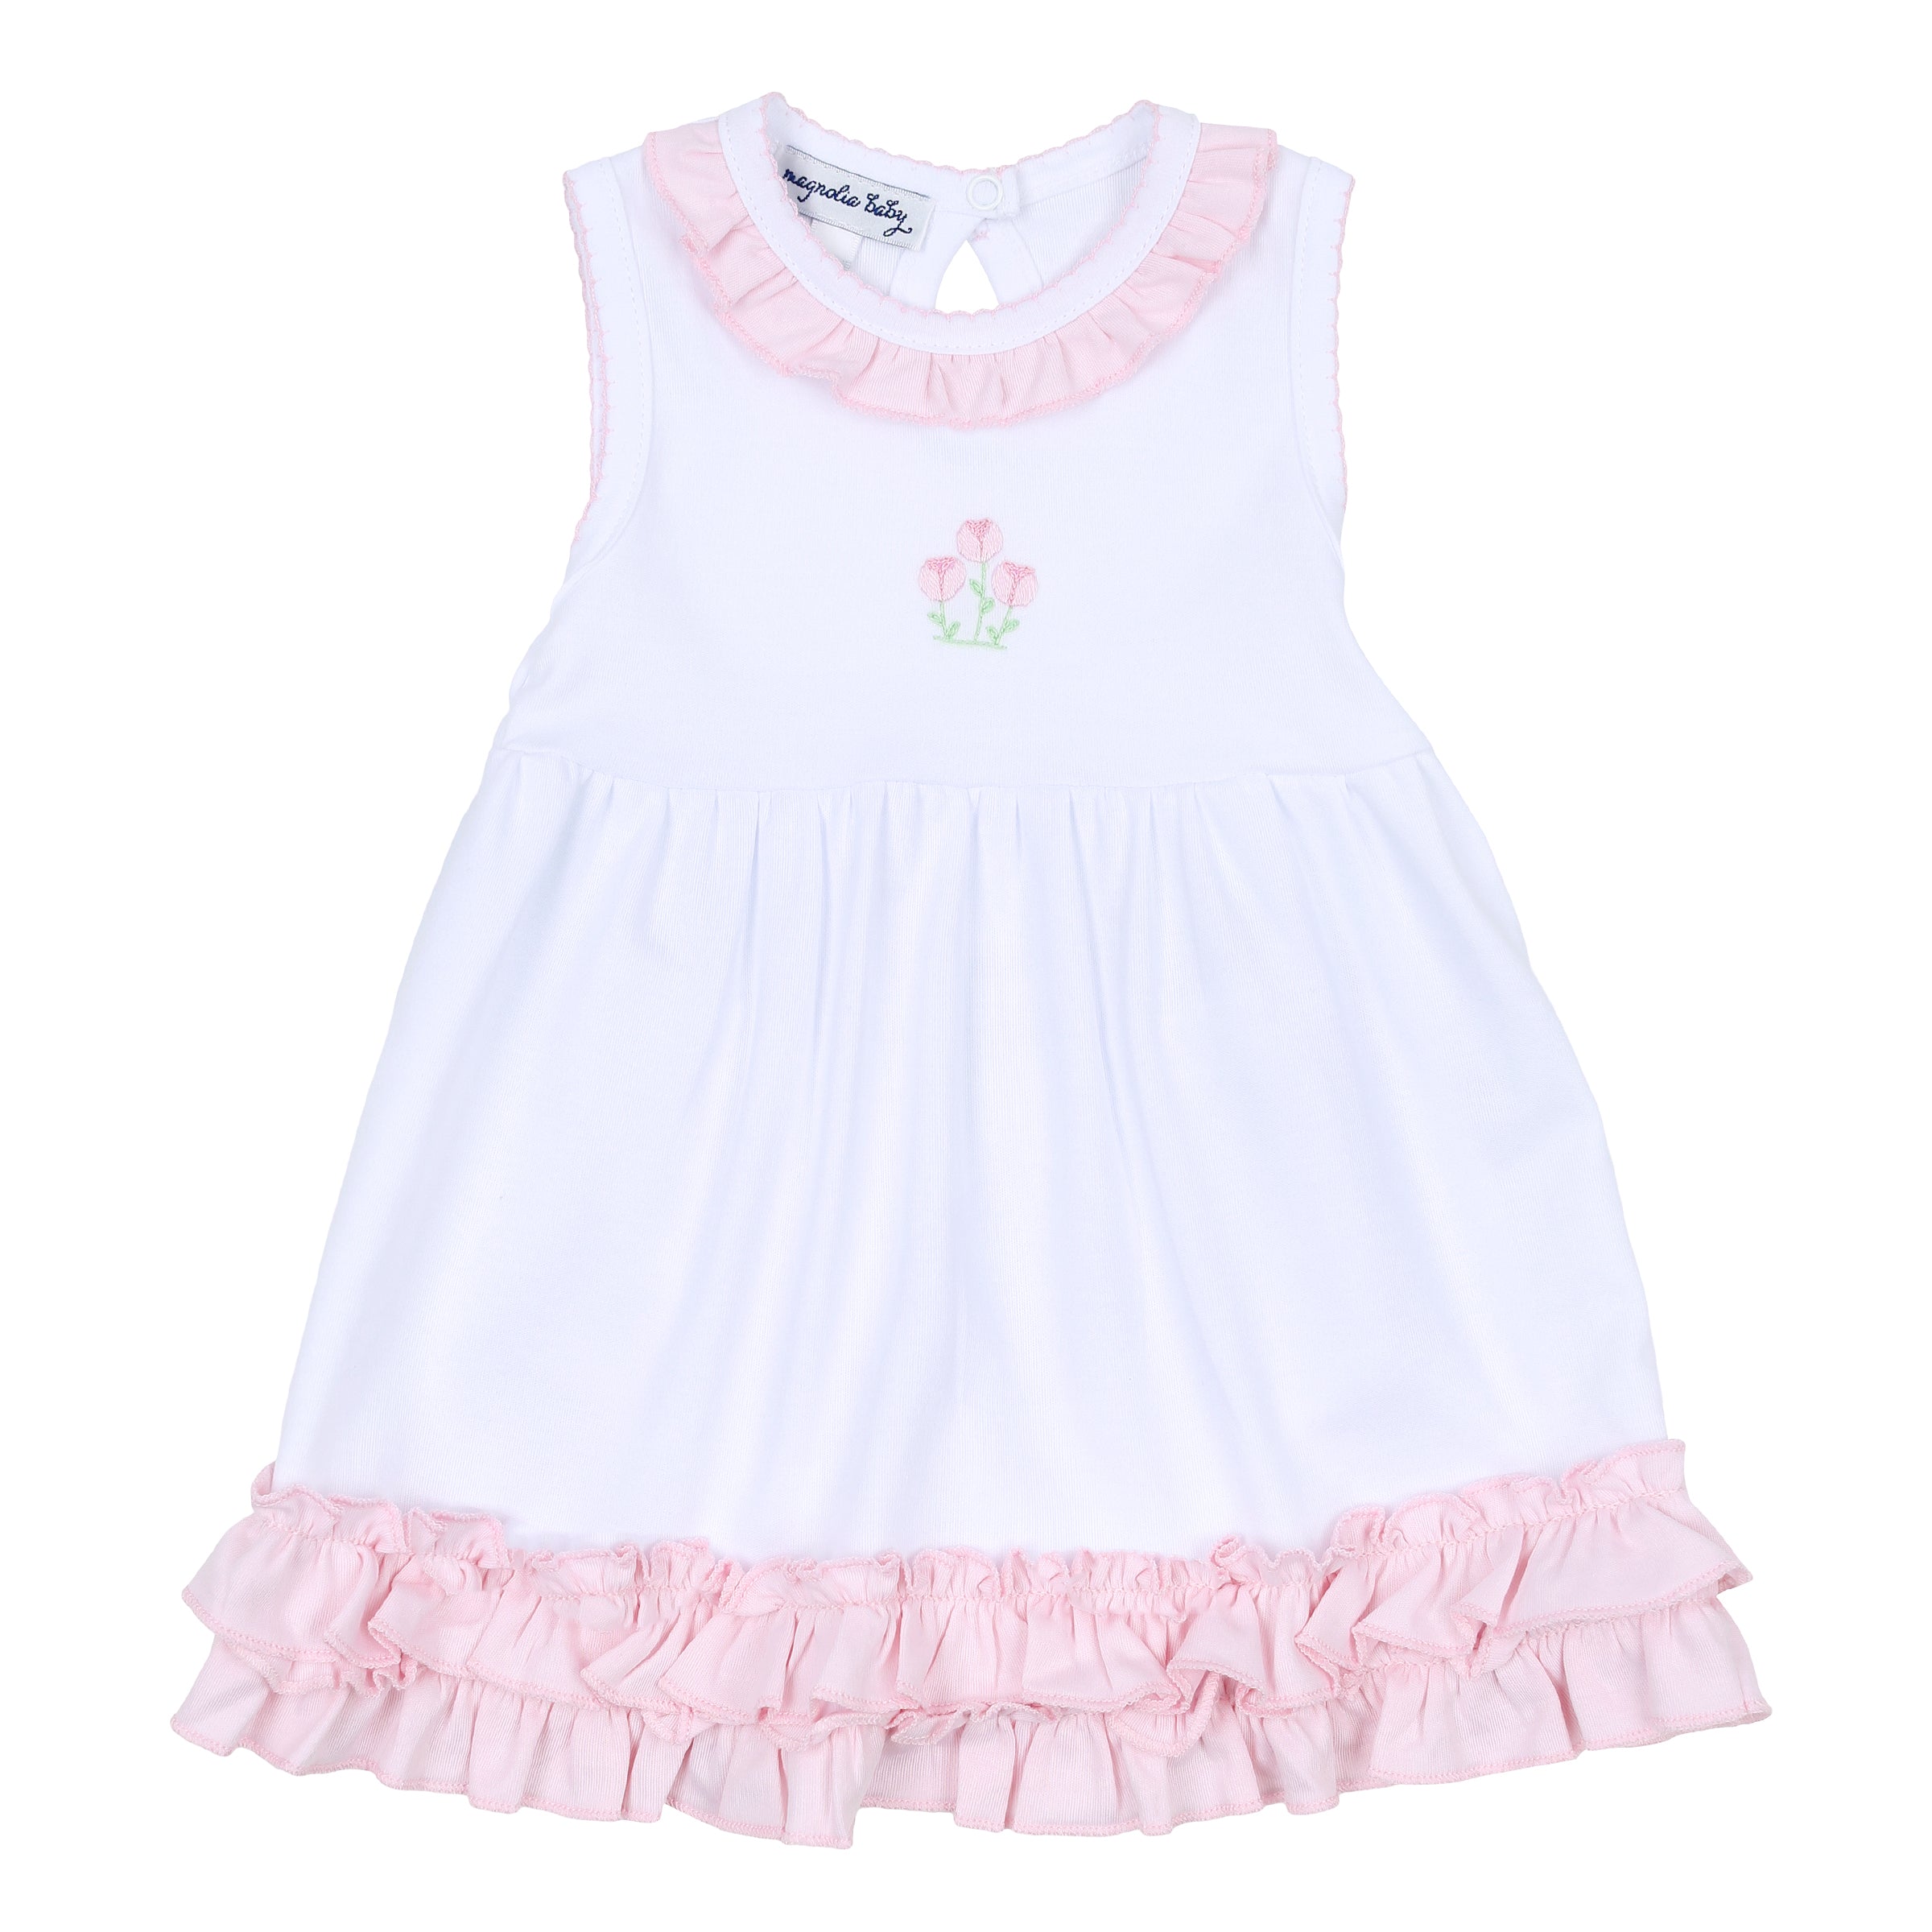 Tessa's Classics Embroidered Toddler Dress